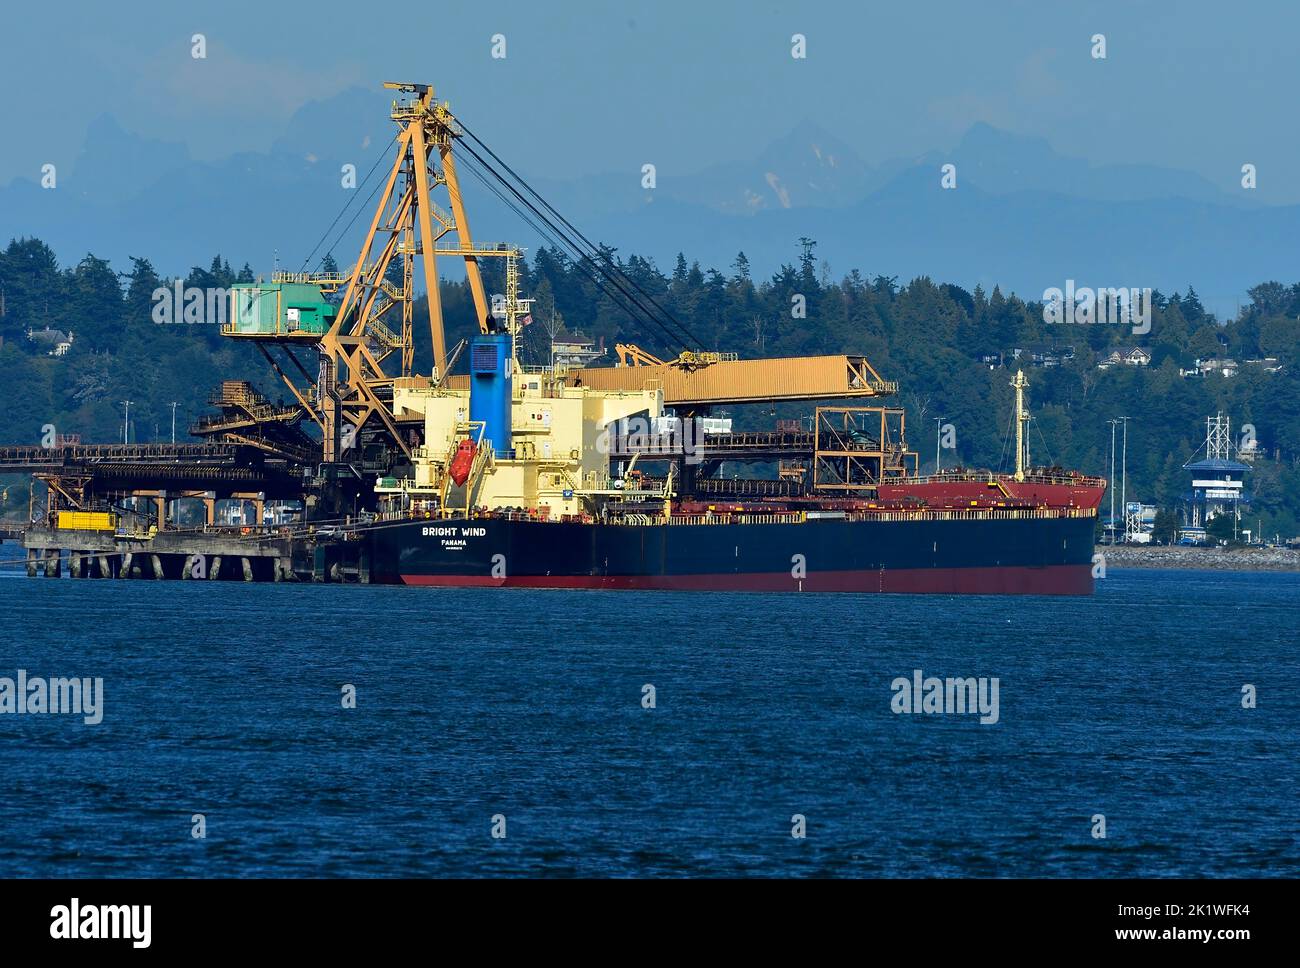 A bulk carrier ship waiting to be loaded at the port of Vancouver in British Columbia Canada Stock Photo